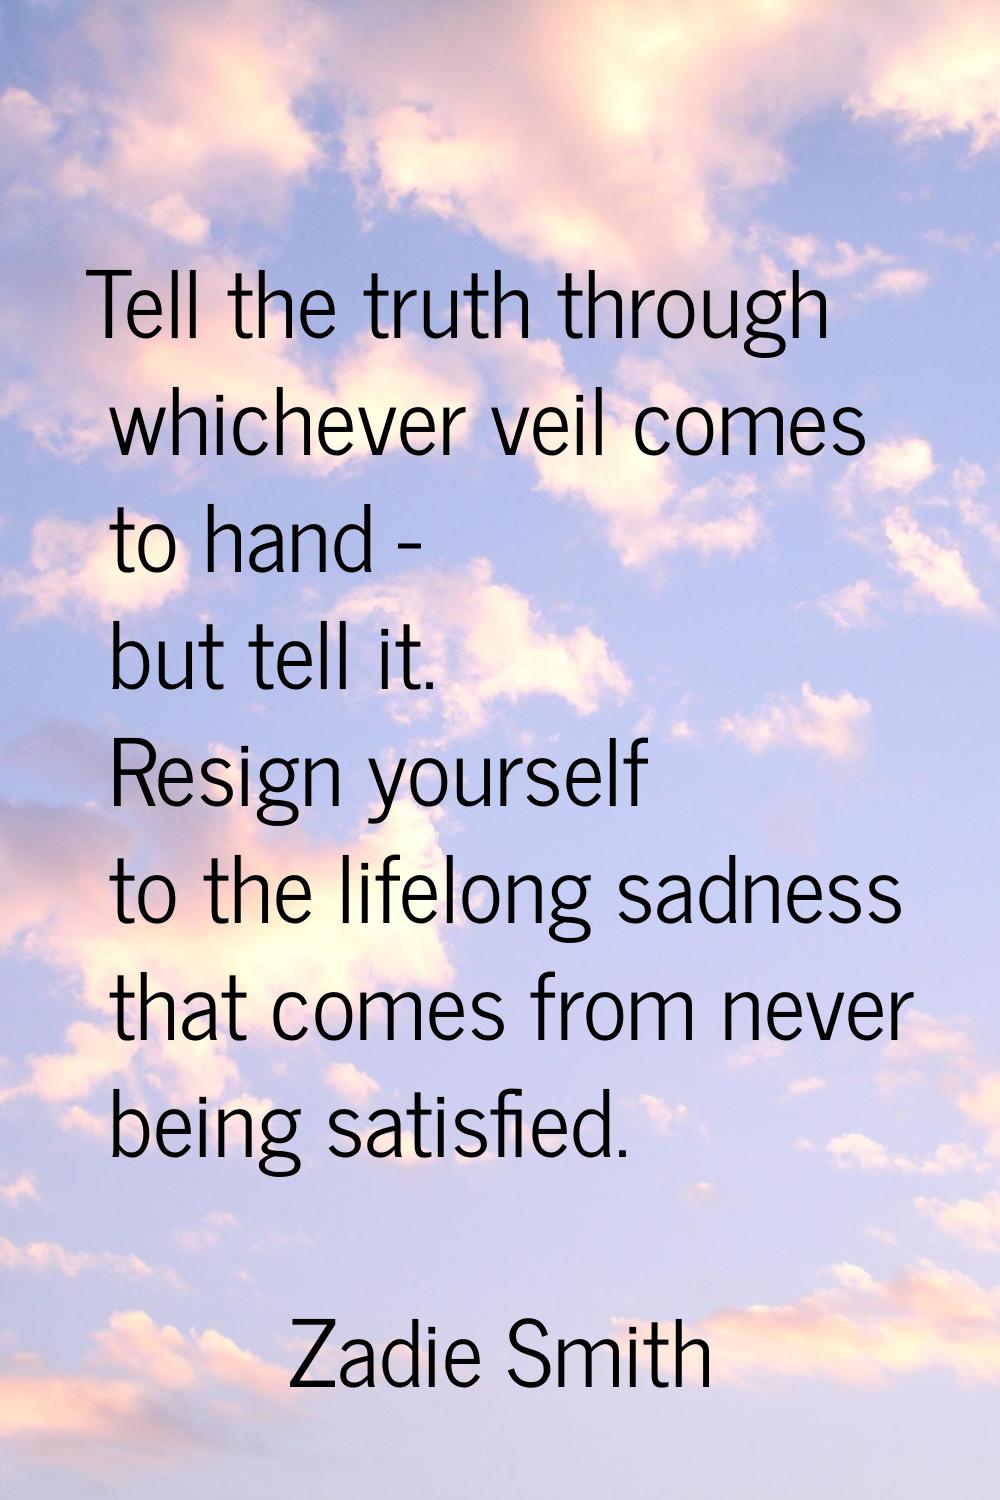 Tell the truth through whichever veil comes to hand - but tell it. Resign yourself to the lifelong 